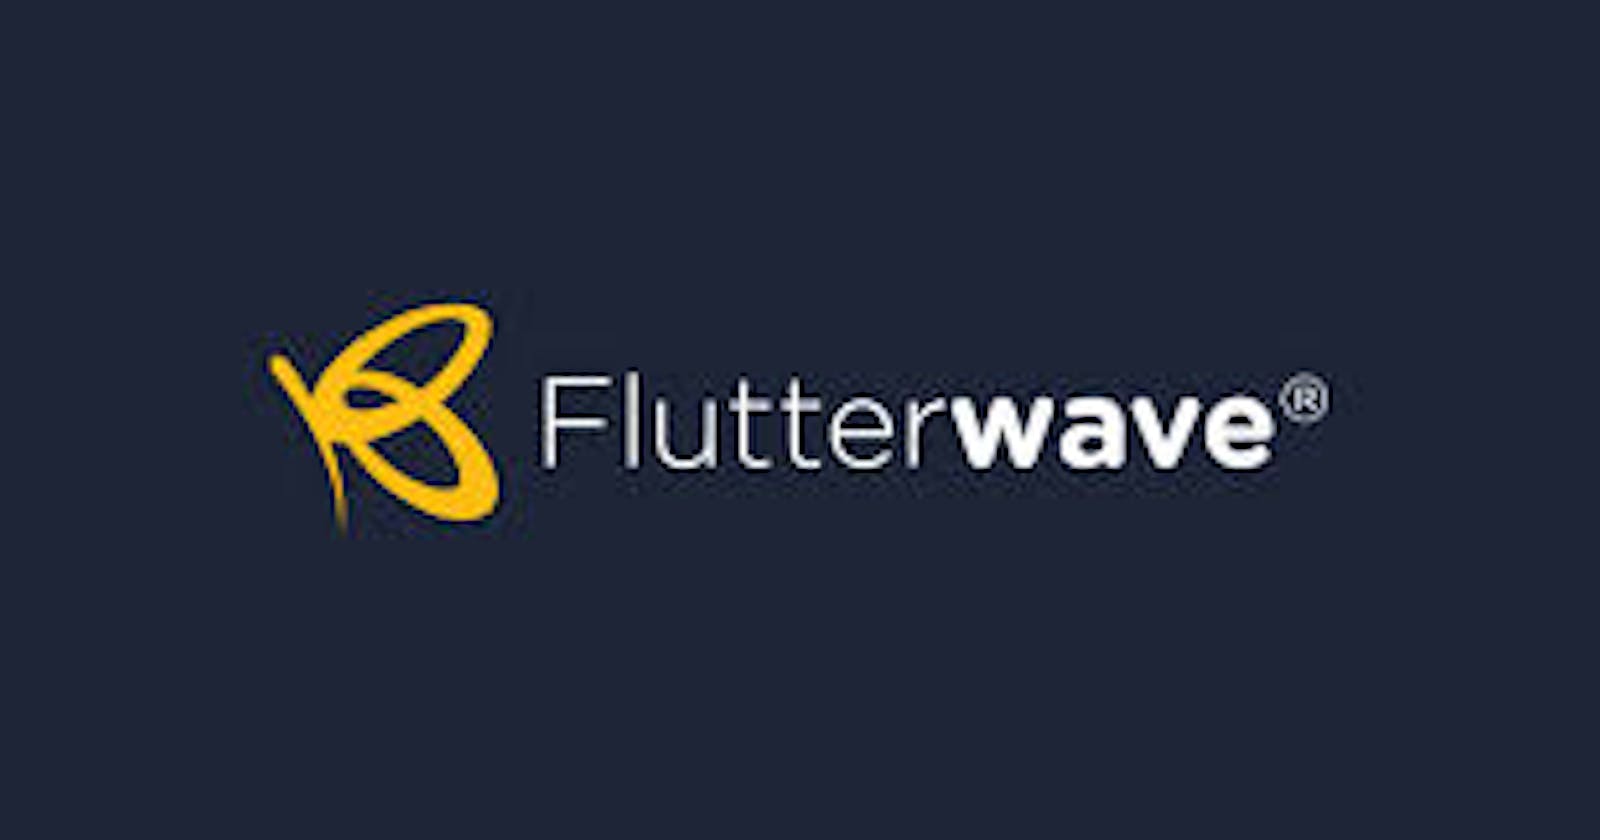 Secure and seamless online payment with Flutterwave